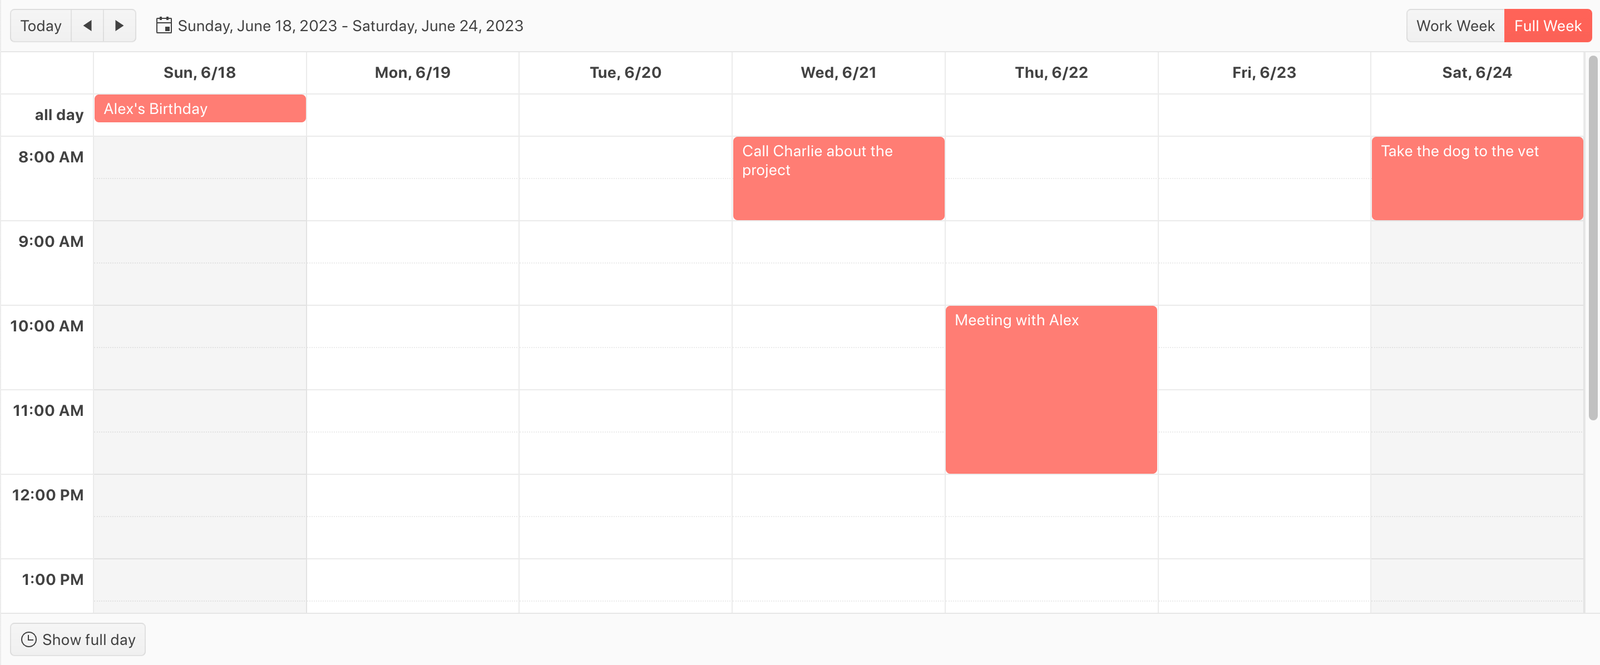 A schedule view of the calendar week June 18-24, 2023, with appointments of varying lengths, including all day, in a pink color